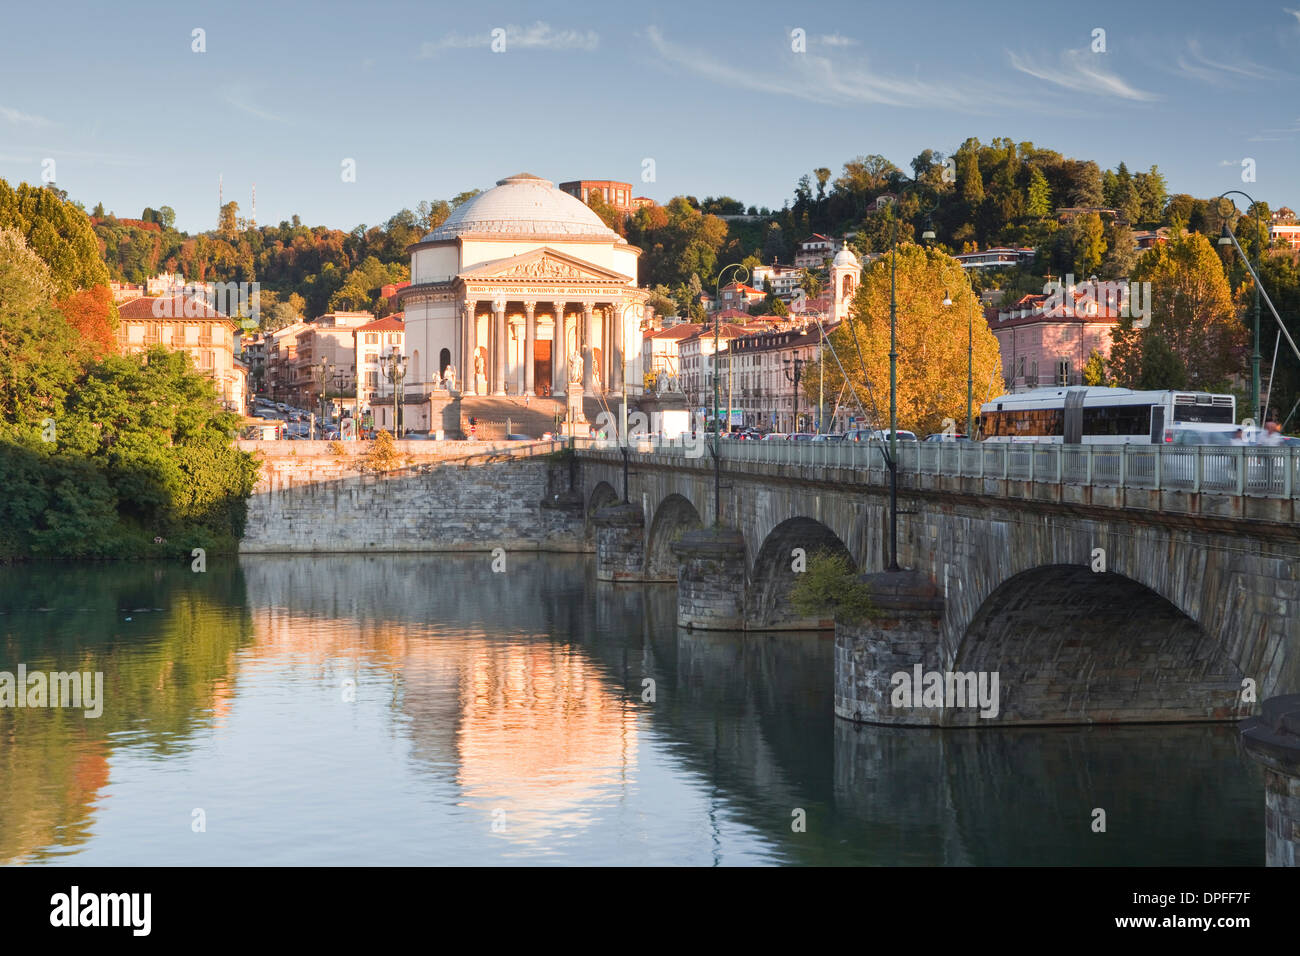 The Gran Madre di Dio church, decorated in the style of a classical temple, seen across the River Po, Turin, Piedmont, Italy Stock Photo